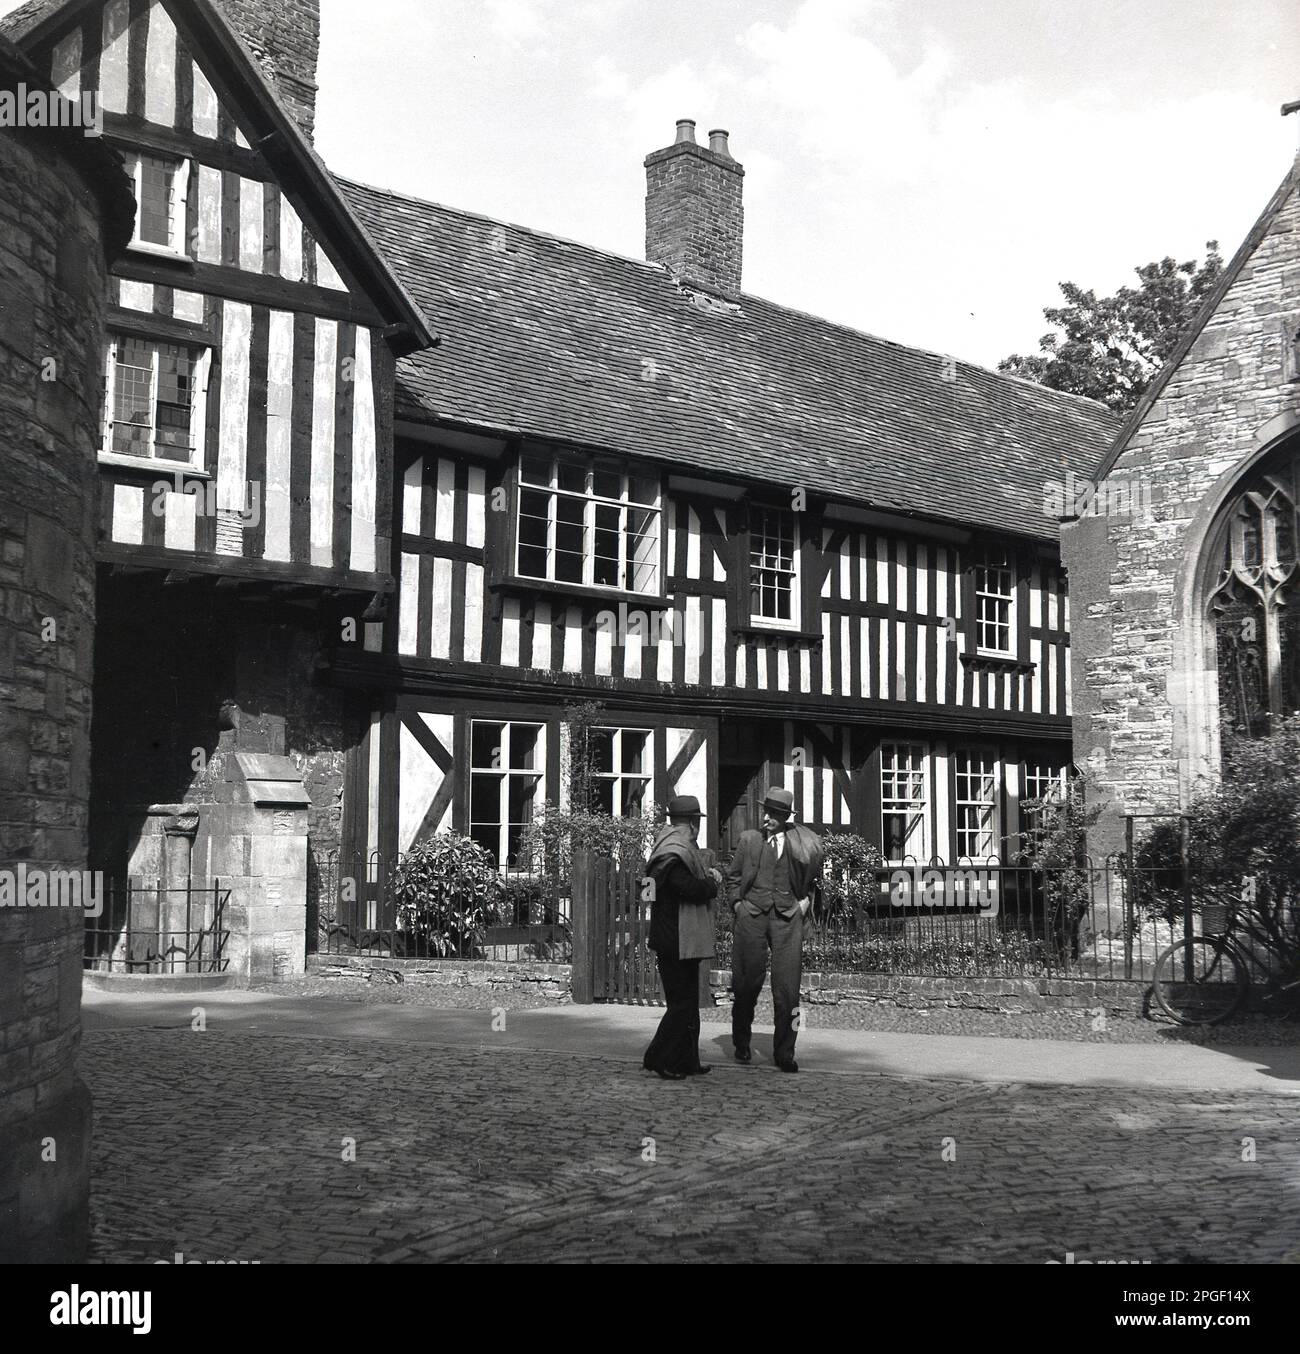 1950s, historical, two men talking outside The Old Vicarage, an old timber-framed building, in Evesham, Wychavon, Worcestershire, England, UK. The Church House was listed as a Grade II building in 1952. Stock Photo